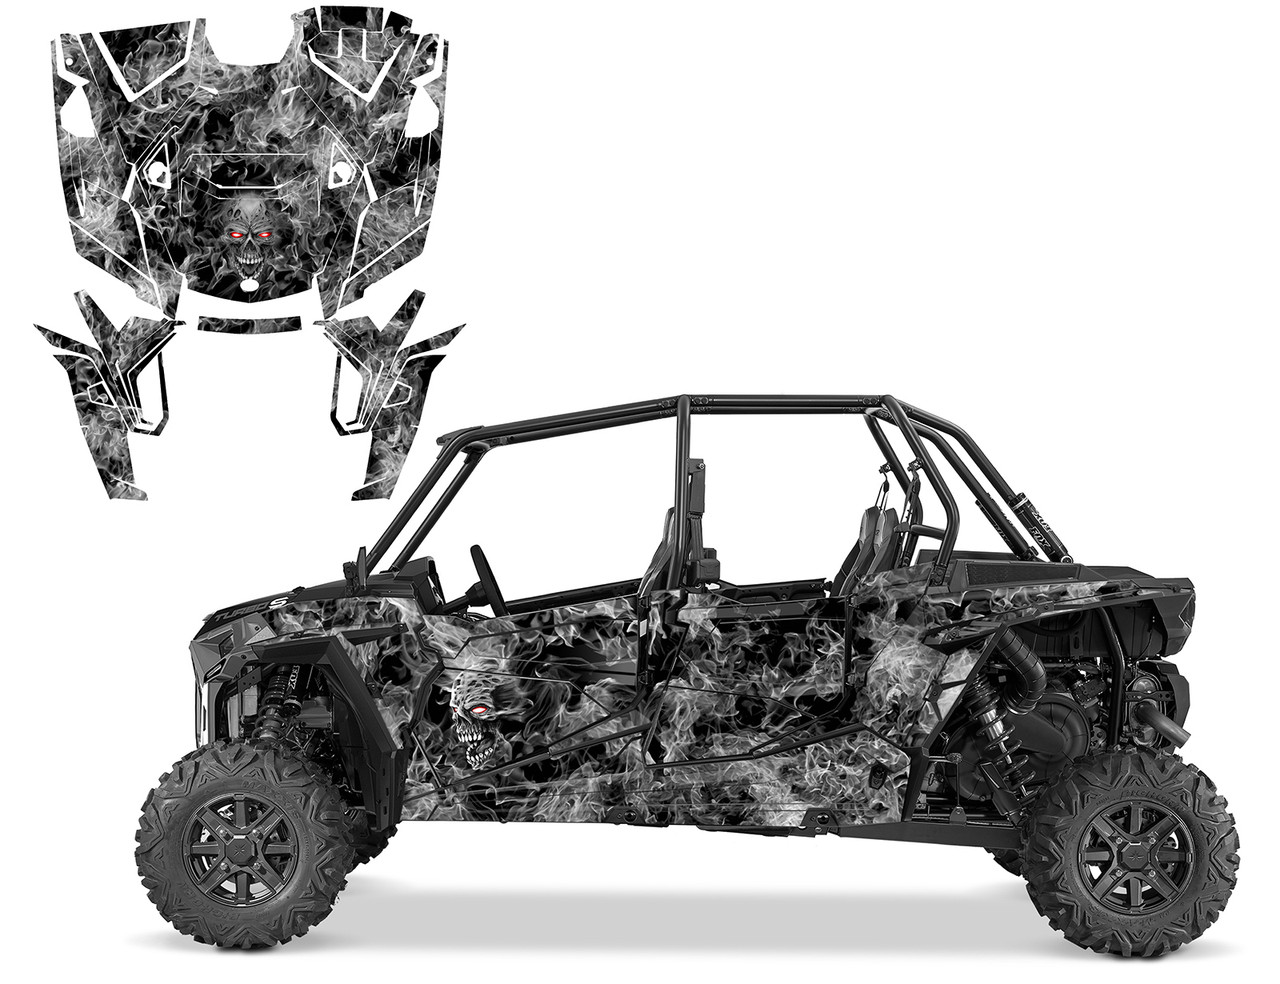 New 2022 RZR 4 turbo S graphics with Flaming Zombie design